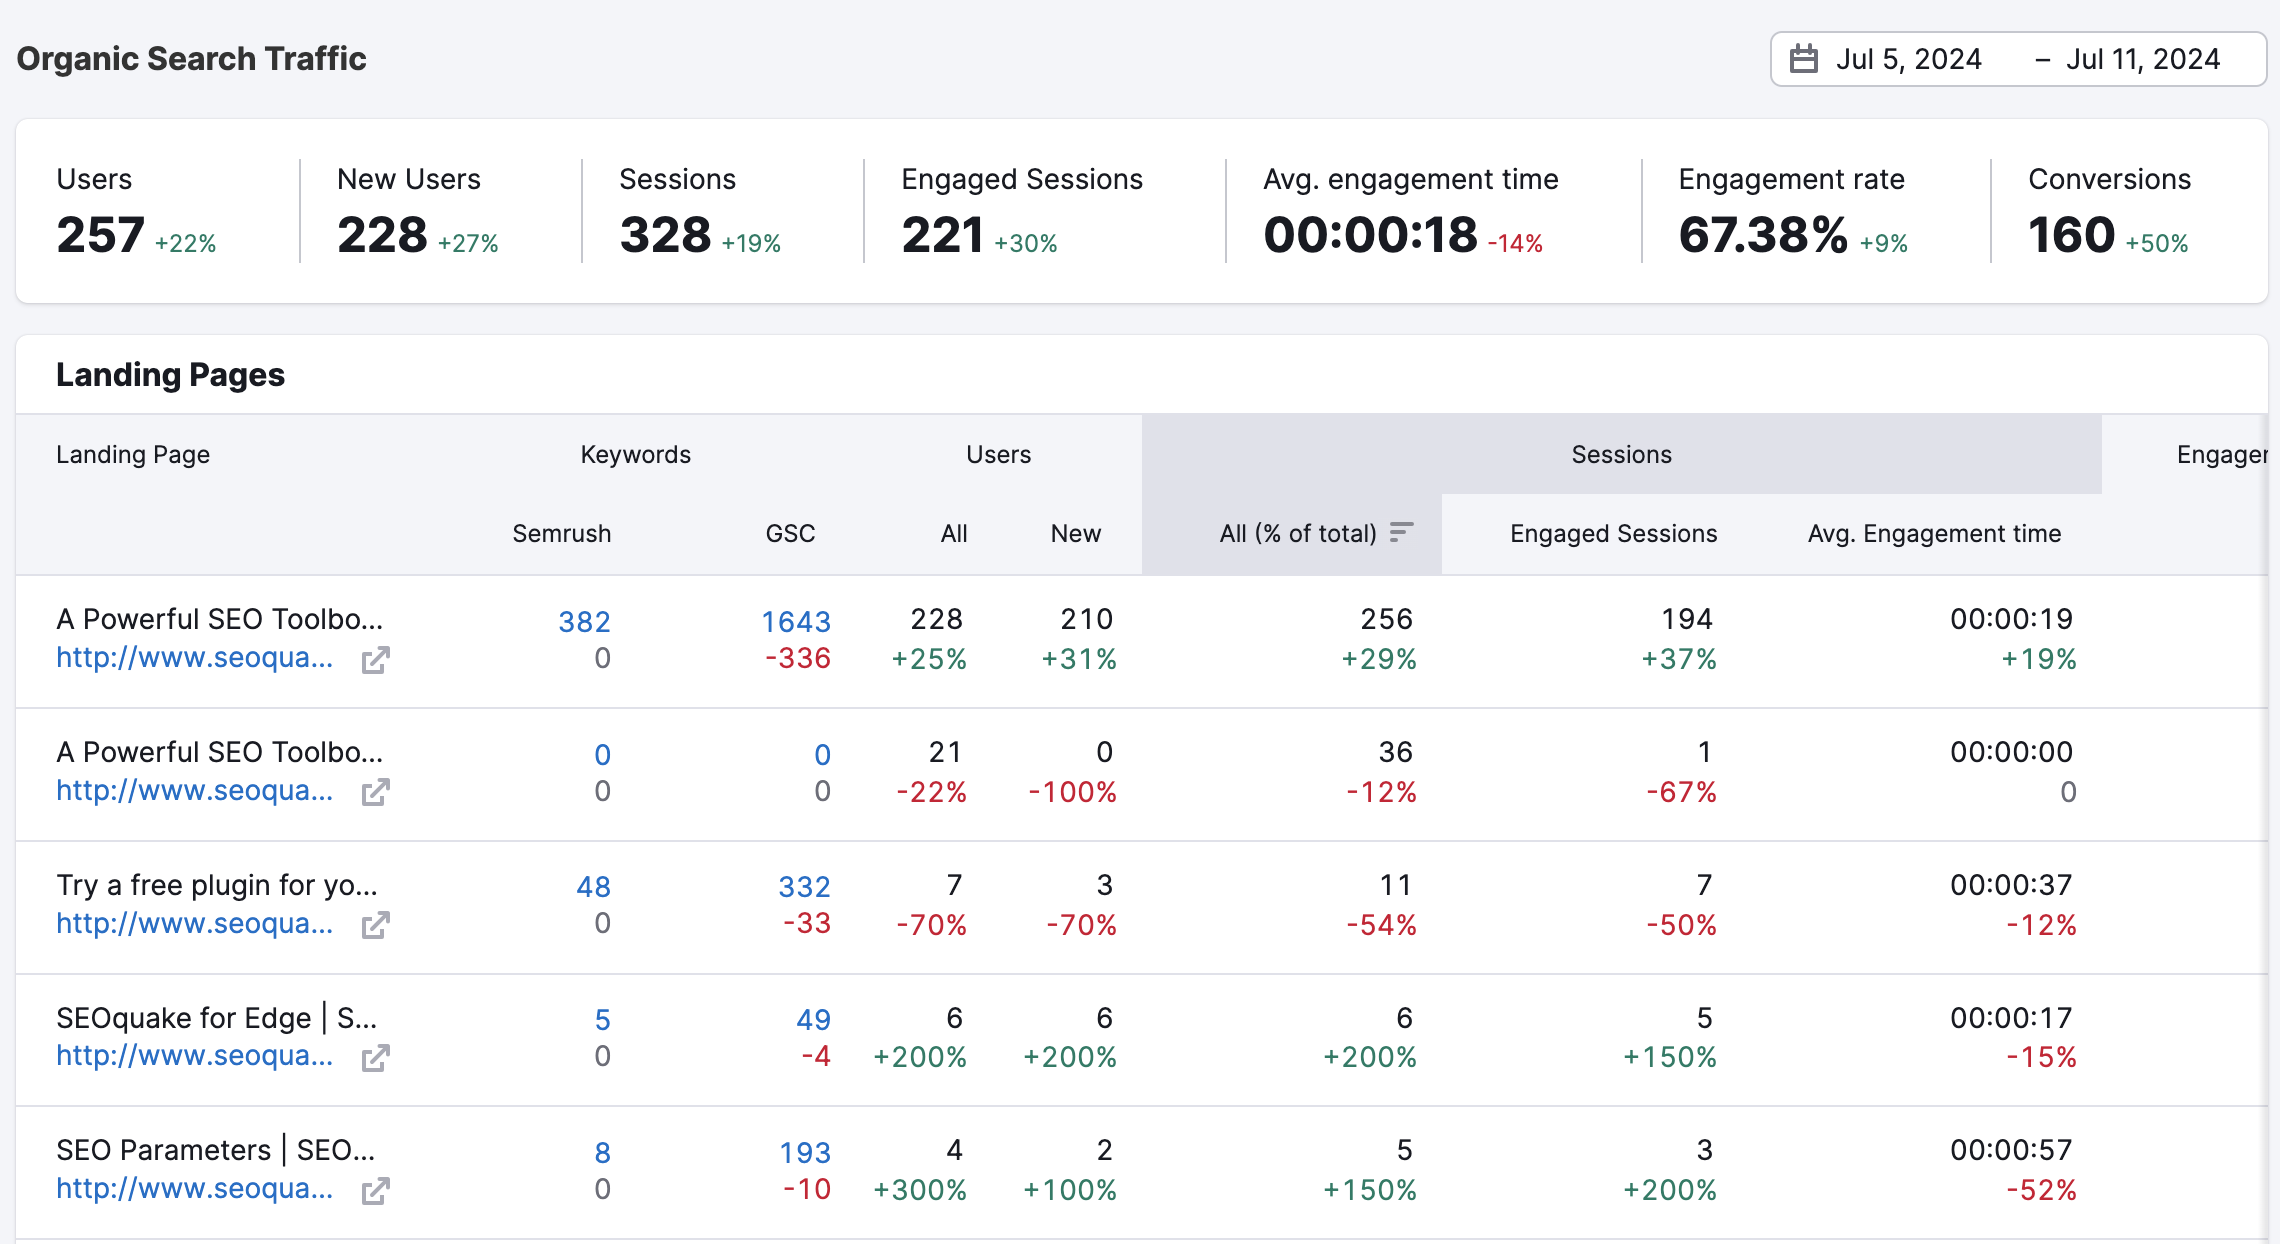 Organic Traffic Insights report showing the main metrics, landing pages, keywords, and their metrics both from Semrush and Google Search Console.